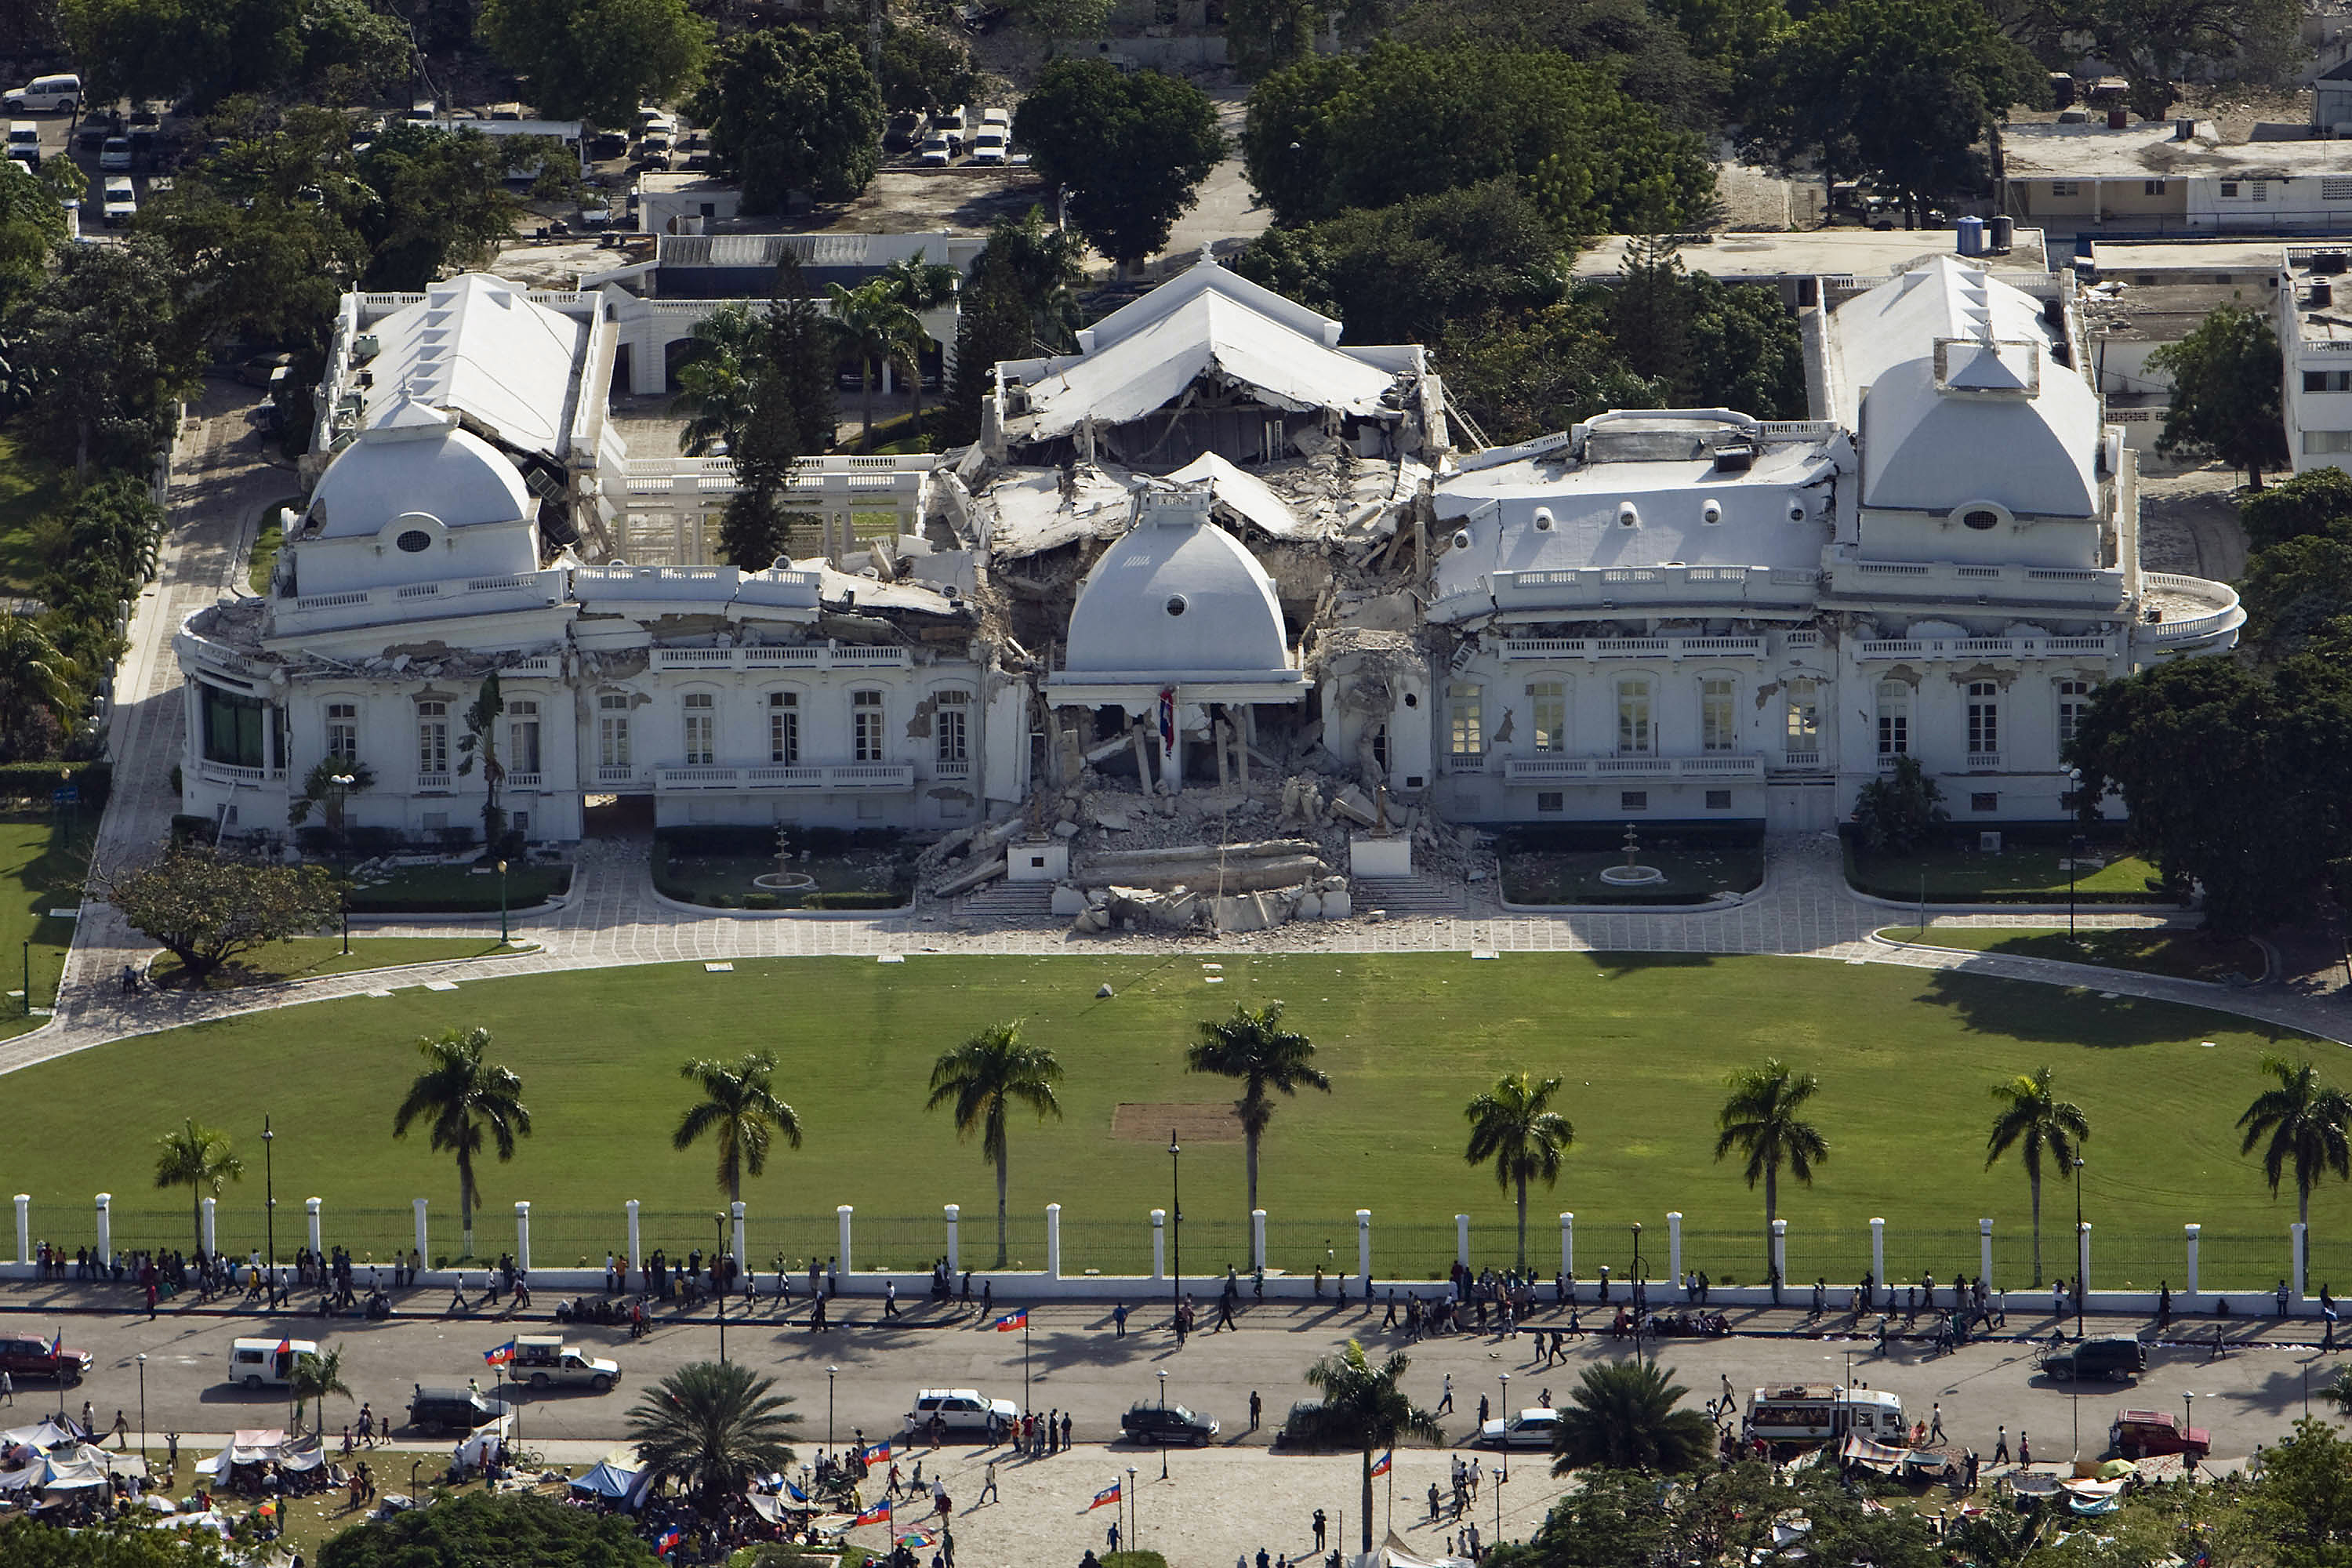 The Haitian National Palace in Port-au-Prince was heavily damaged after the 2010 earthquake.